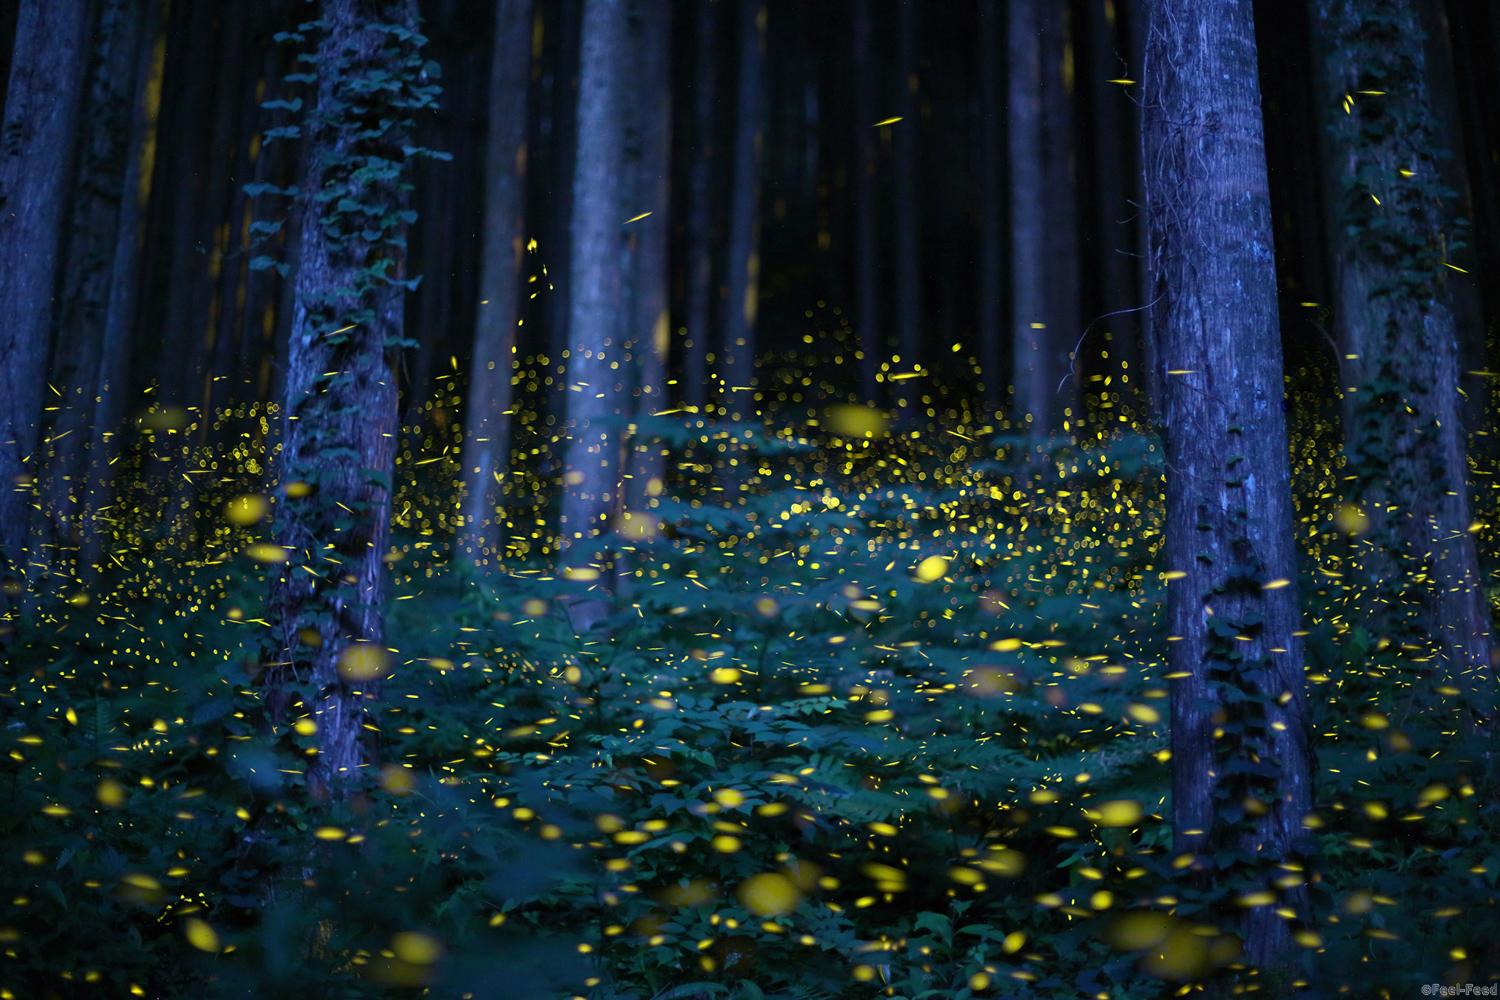 The season of a firefly comes around in Japan at the beginning of a rainy season. This firefly is a species called Luciola parvula, and repeats blink. This species flies in the beautiful forest. [Hime-HOTARU] Call a firefly in Japan. The number of inhabitance of these firefly decreases every year in Japan. This photo was taken a picture of by composite photograph (30 sec × 160 shots).anon EOS 5D Mark III + EF50mm F1.8 lens, 30 sec. at f/1.8, ISO2000.